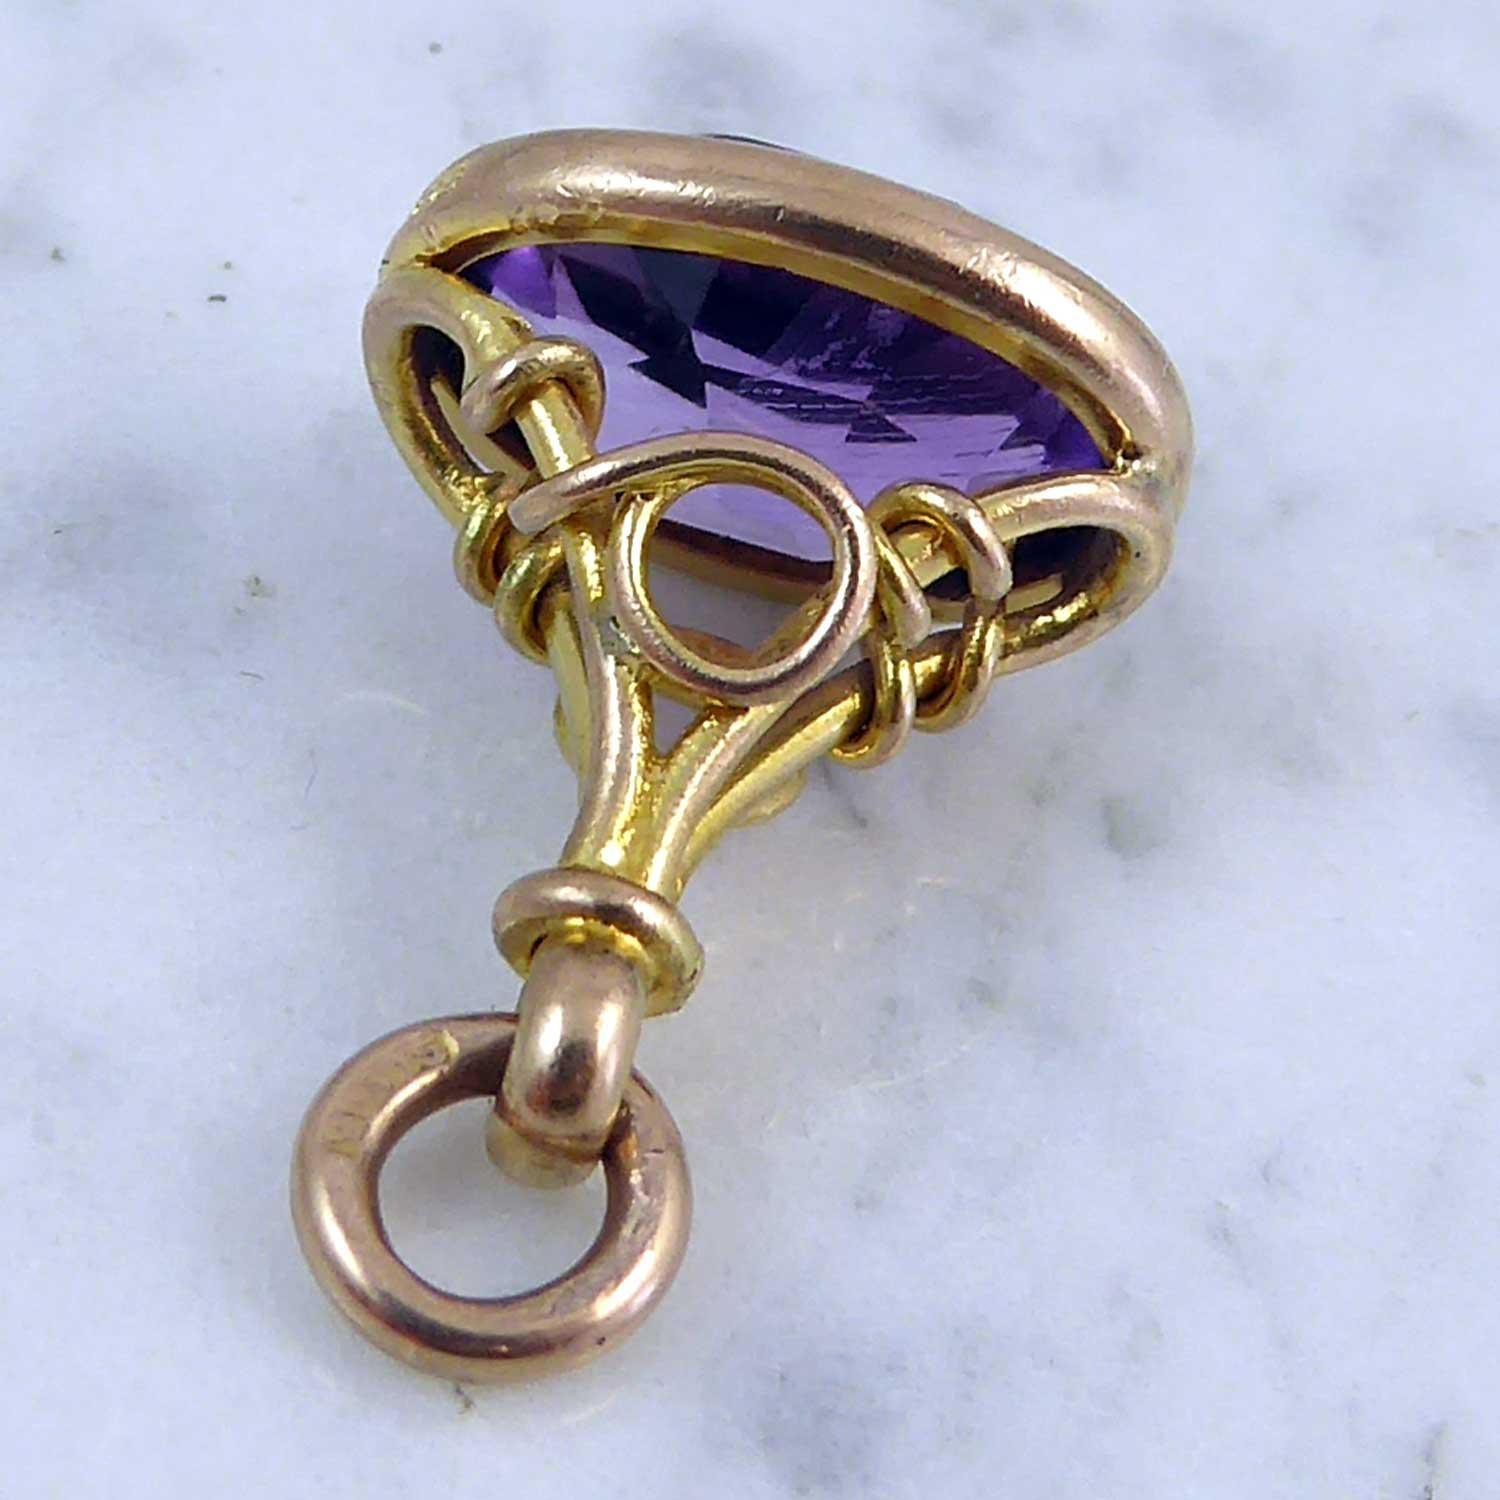 Late Victorian Early Edwardian Antique Gold and Amethyst Pendant Mini Fob 2